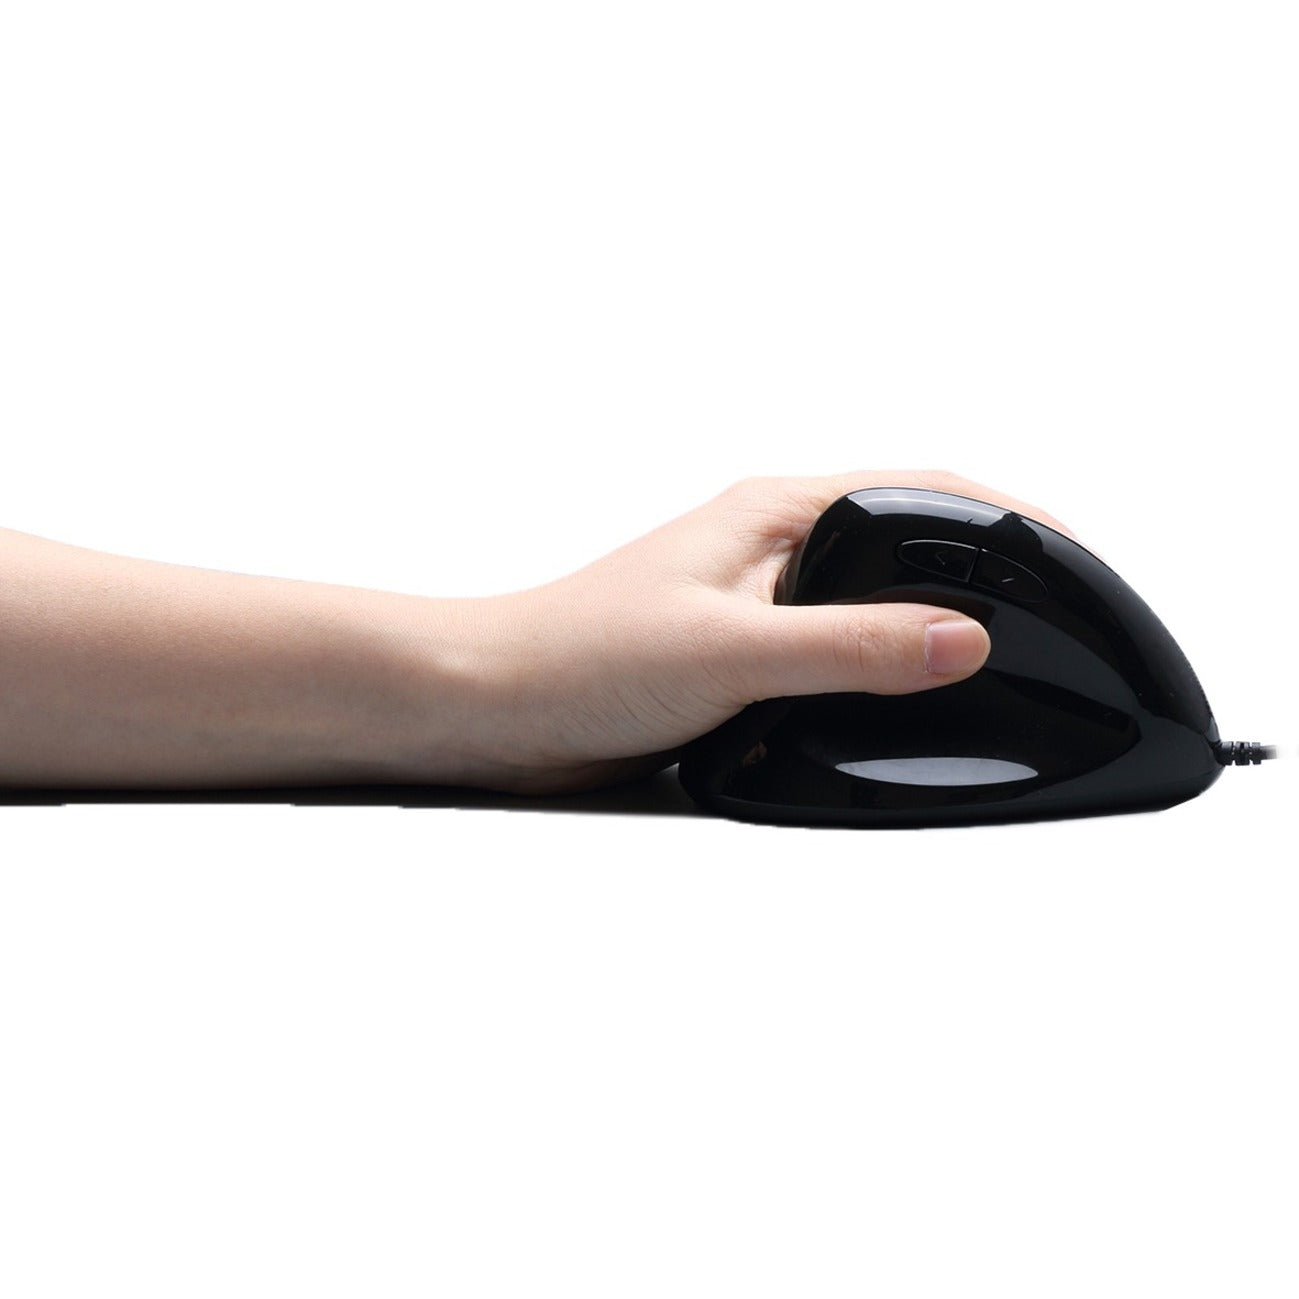 Adesso IMOUSE  E7 Programmable Vertical Ergonomic Left-Handed Mouse, 6 Buttons, 6400 DPI, USB Connection